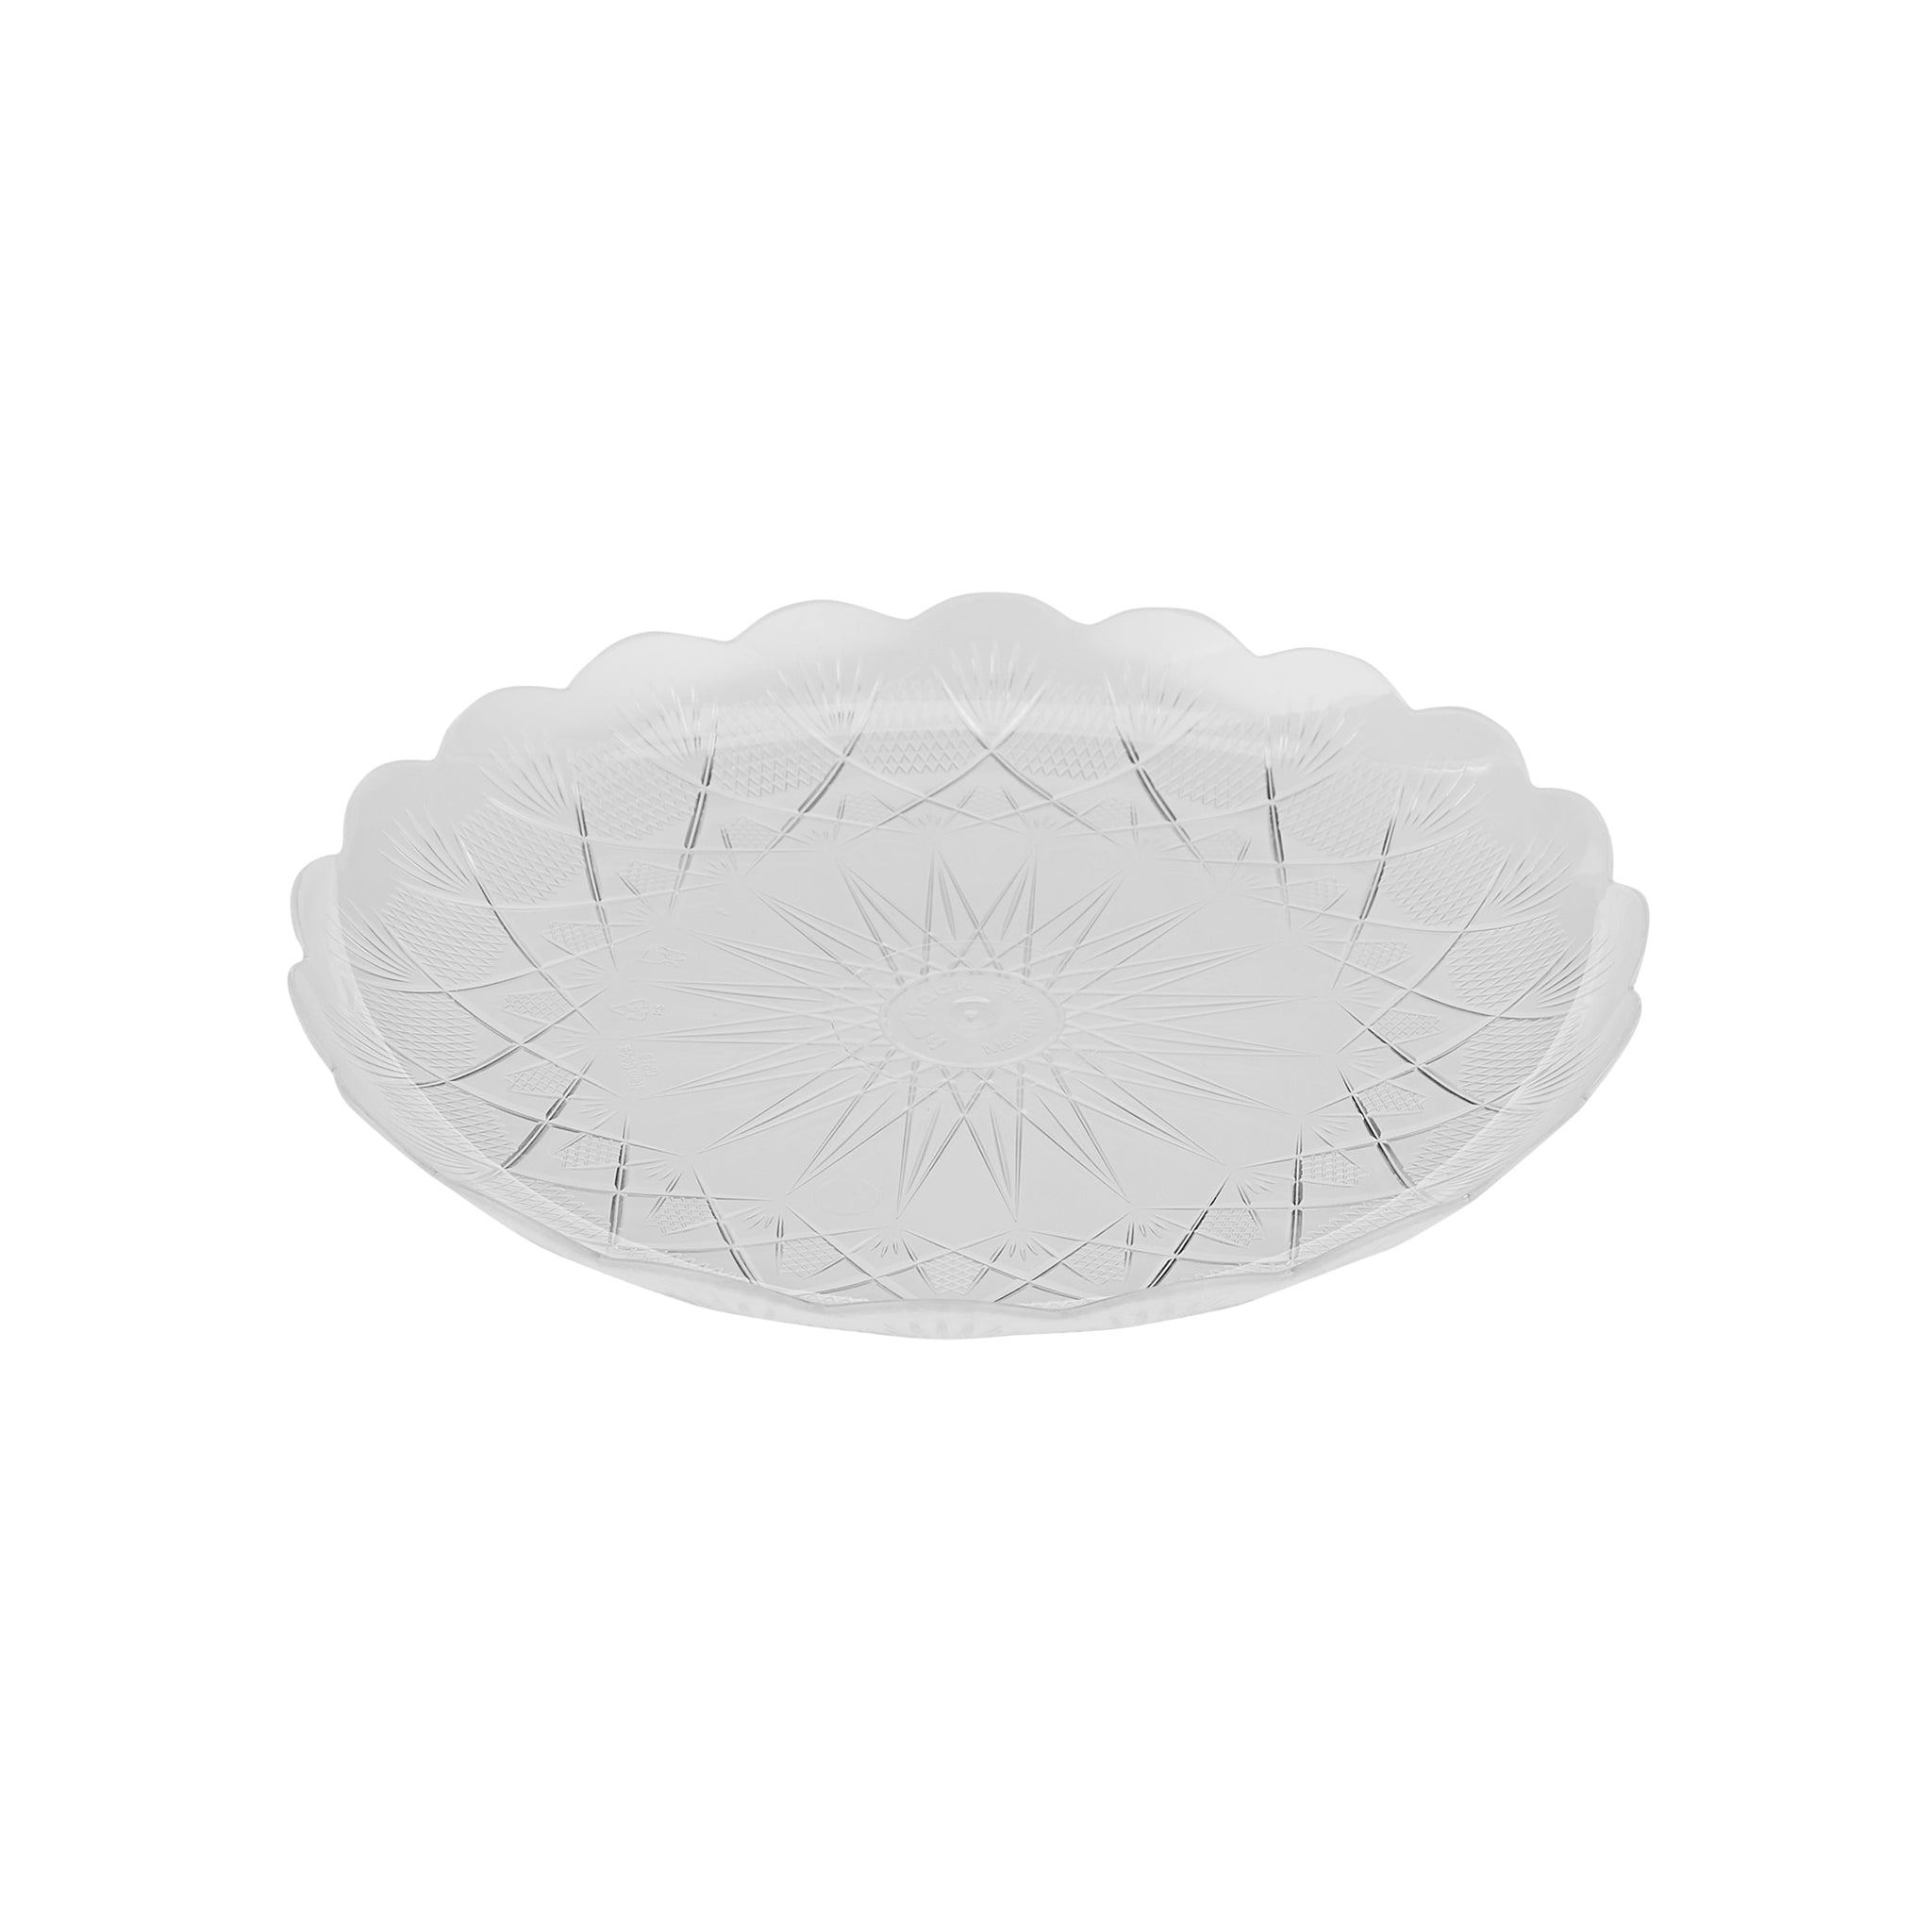 5 Pieces Round Crystal Plate - Hotpack Global